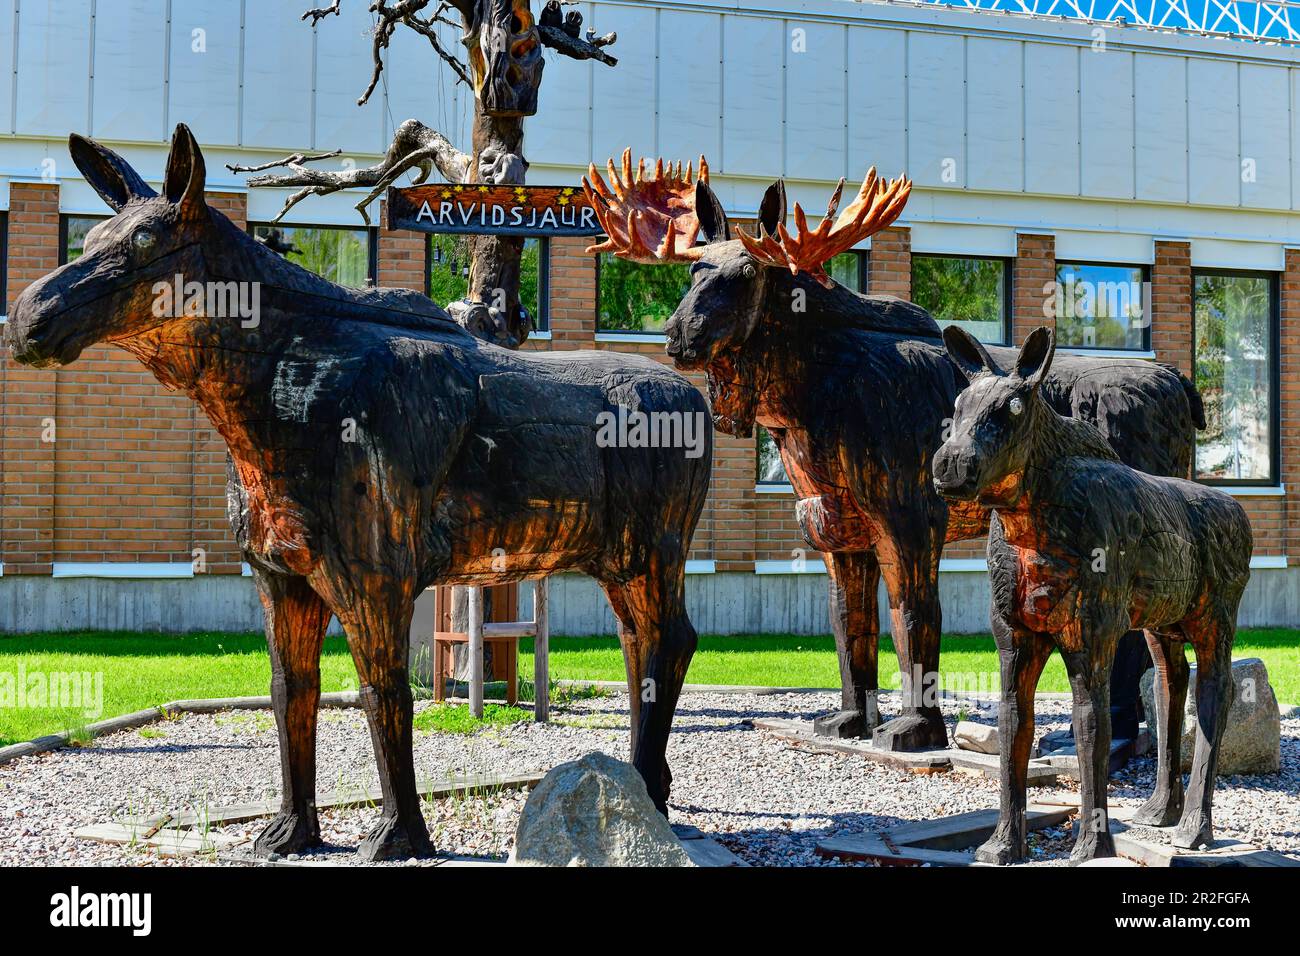 Sculpture made of moose in front of the parish hall in Arvidsjaur, Norrbotten County, Sweden Stock Photo